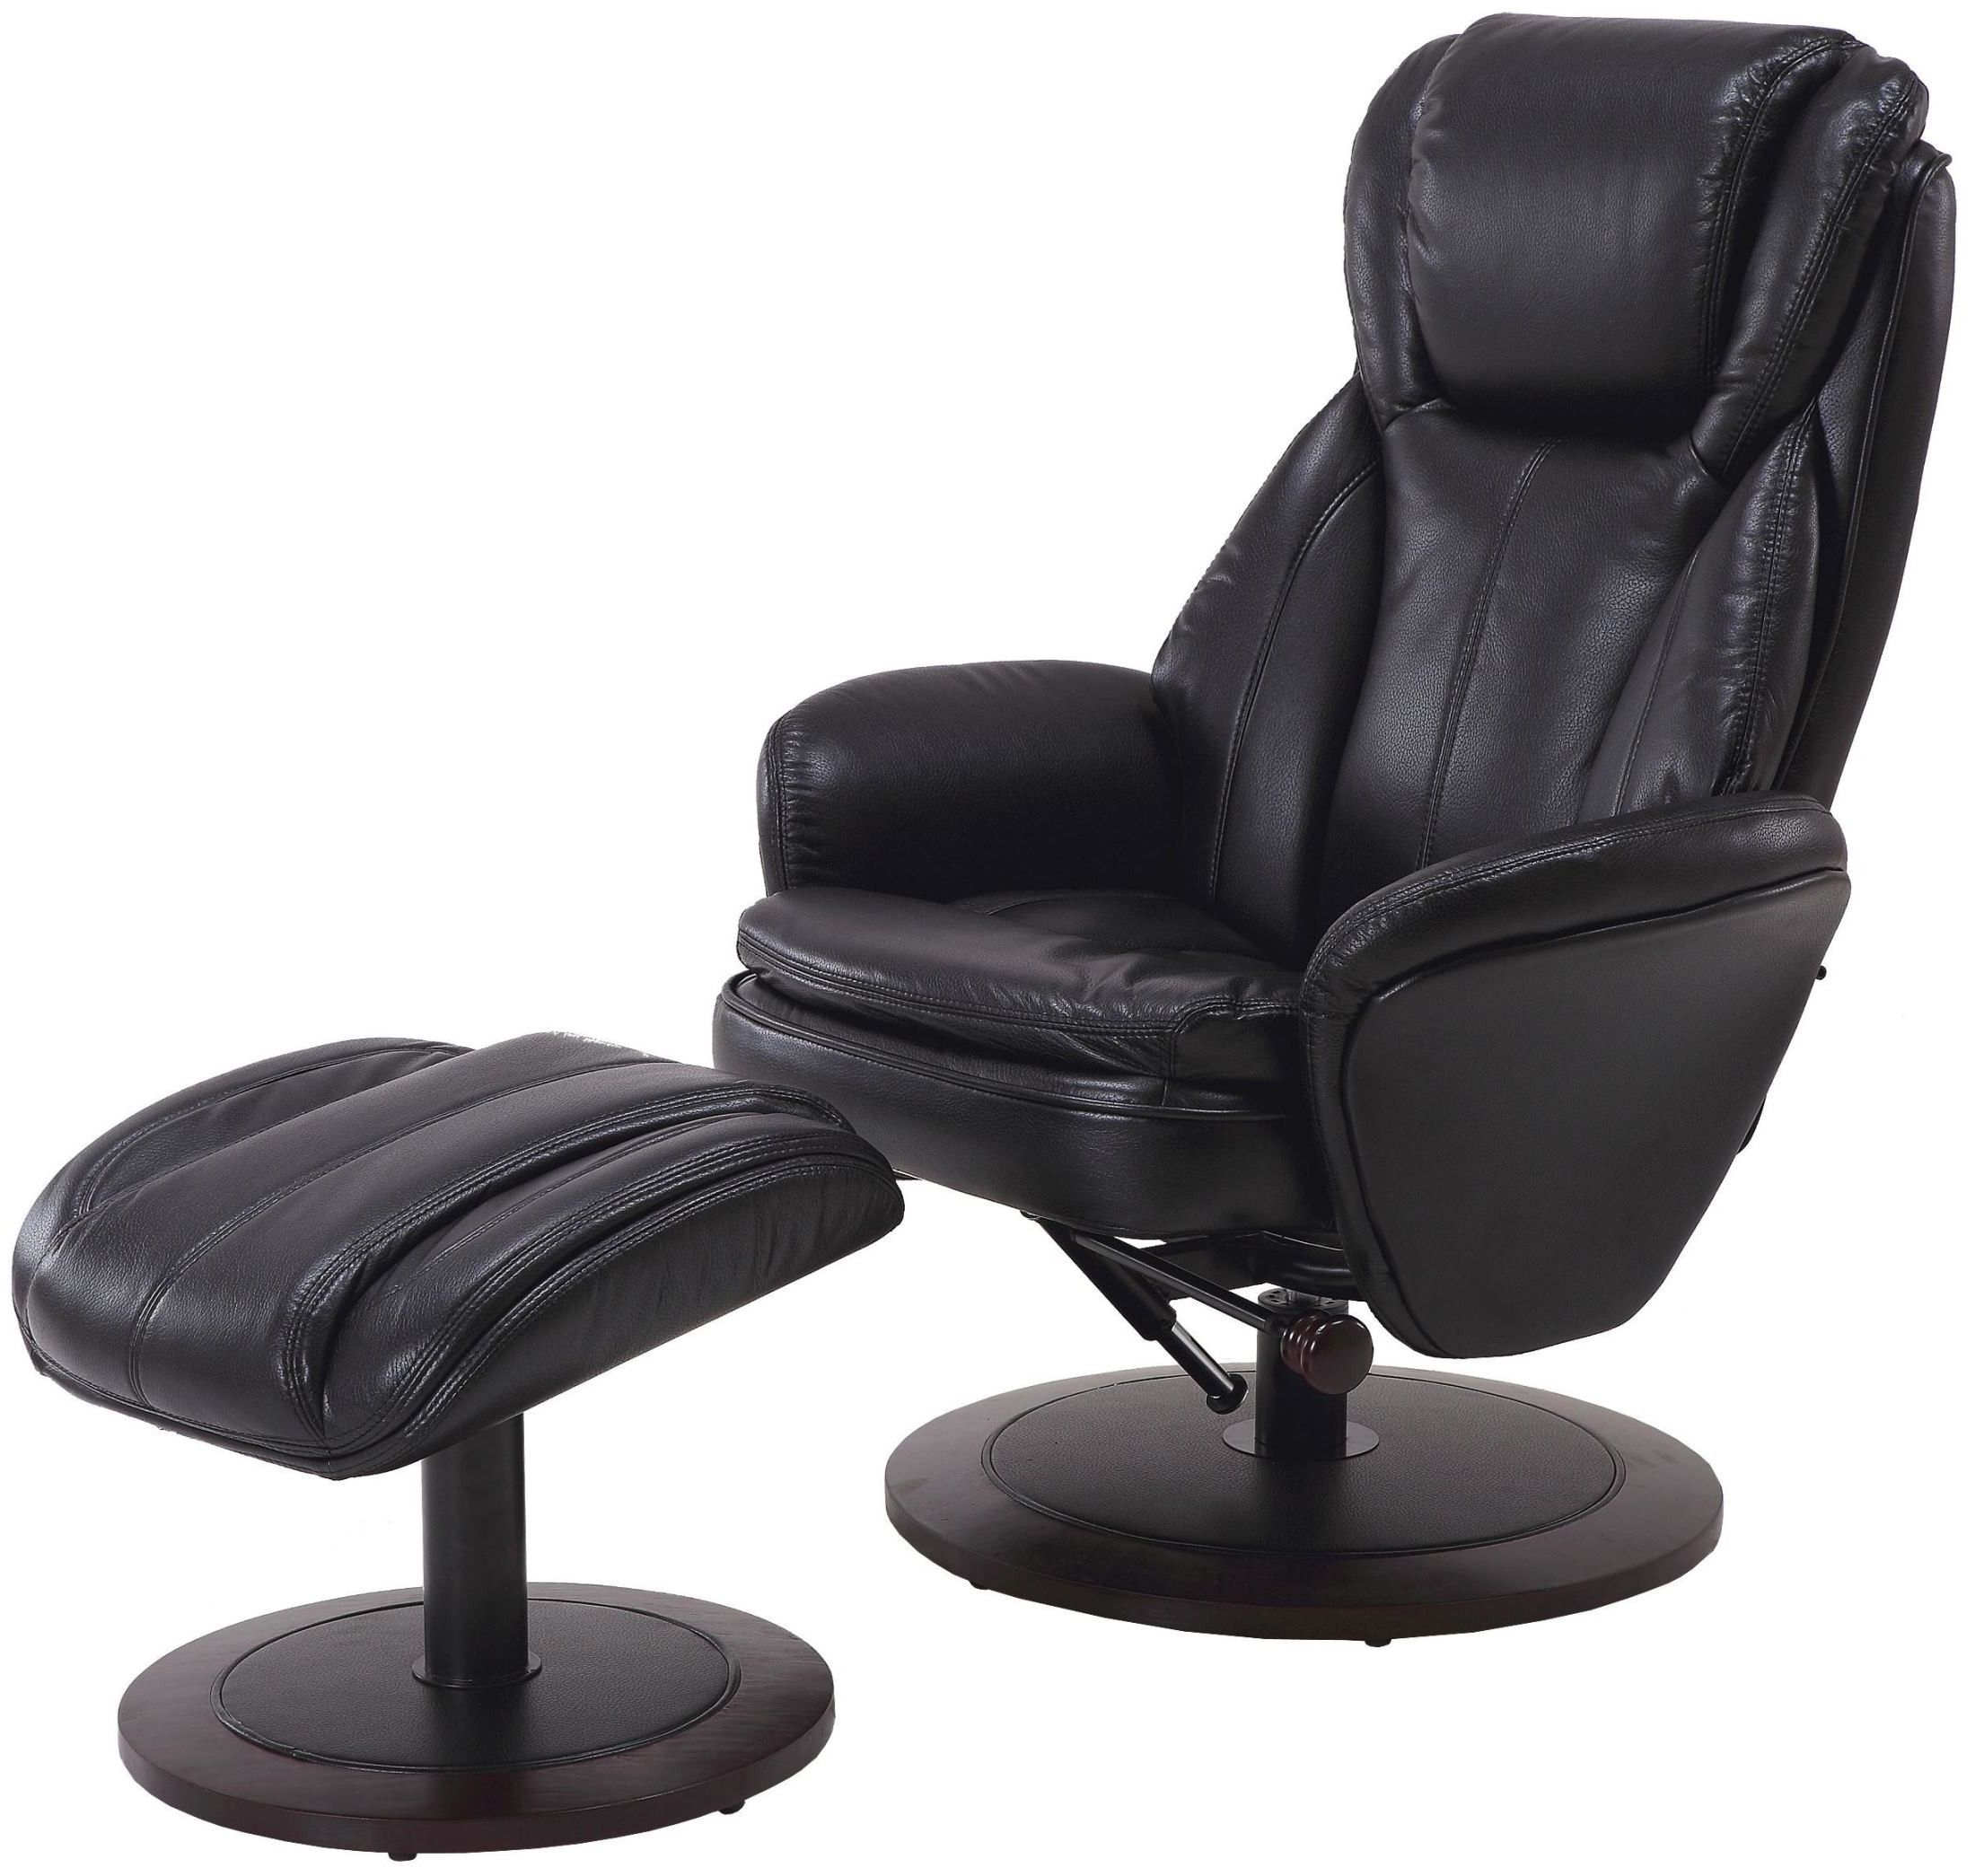 Most Popular Onyx Black Modern Swivel Ottomans Intended For Norway Black Breathable Swivel Recliner With Ottoman From Mac Motion (View 3 of 10)